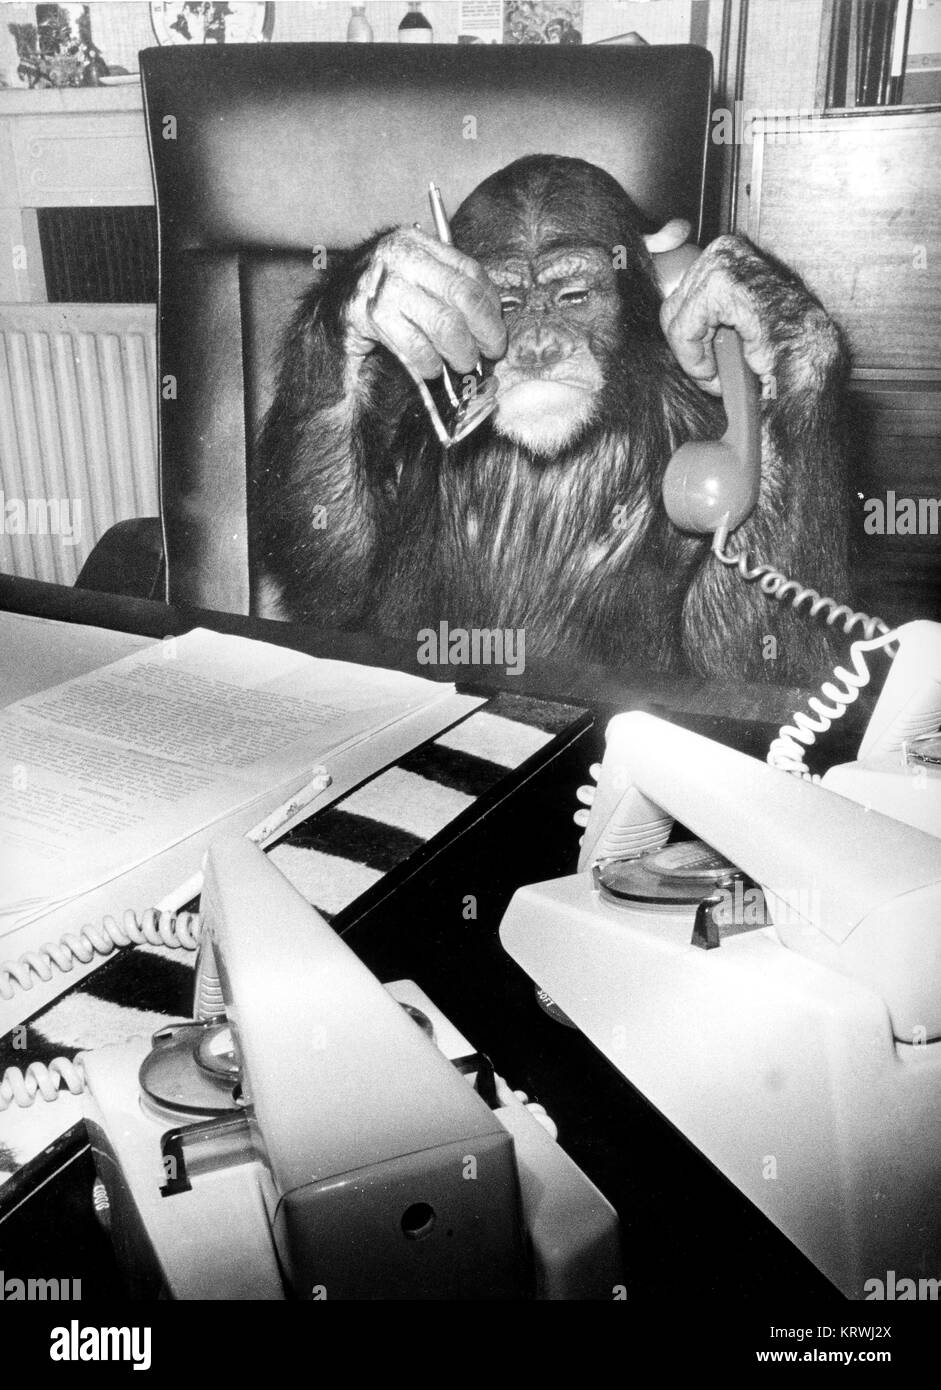 Chimpanzee on the phone at his desk, England, Great Britain Stock Photo